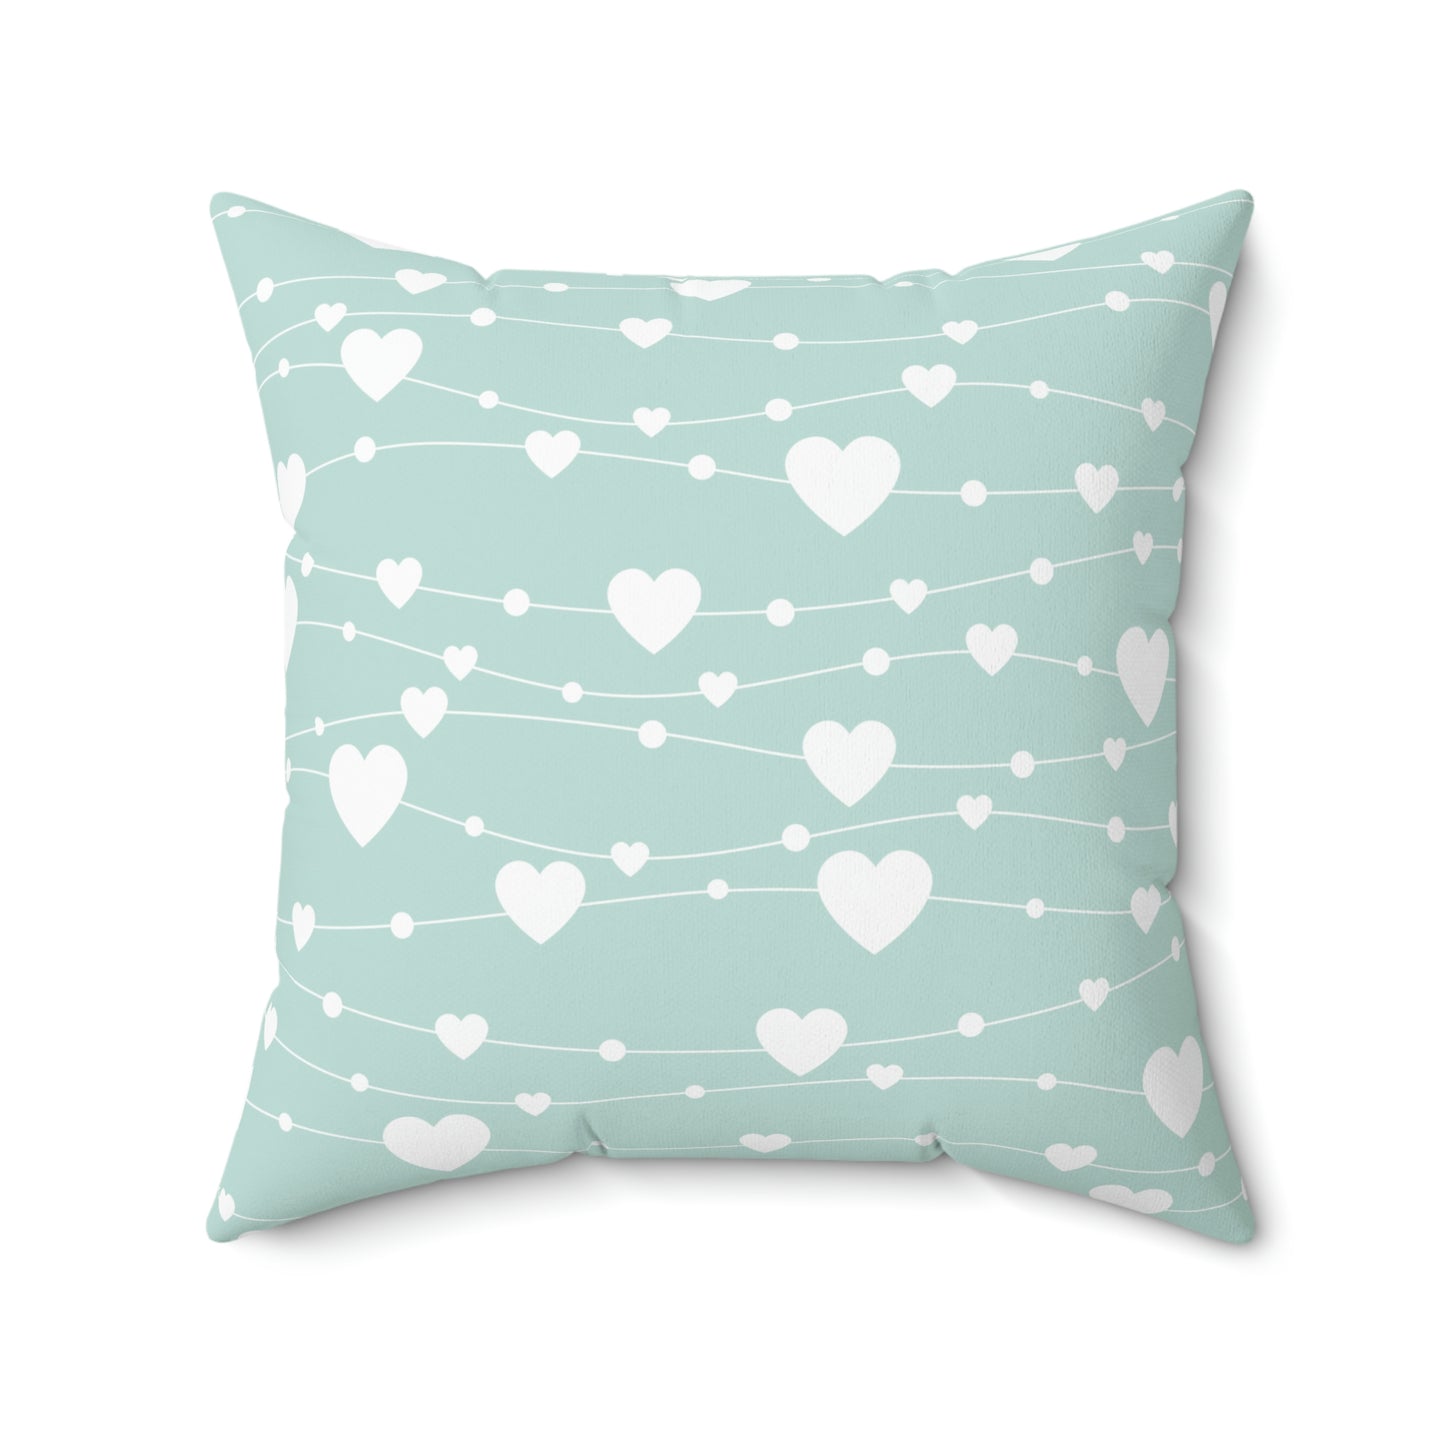 Mint Heartstrings Square Pillow Cover